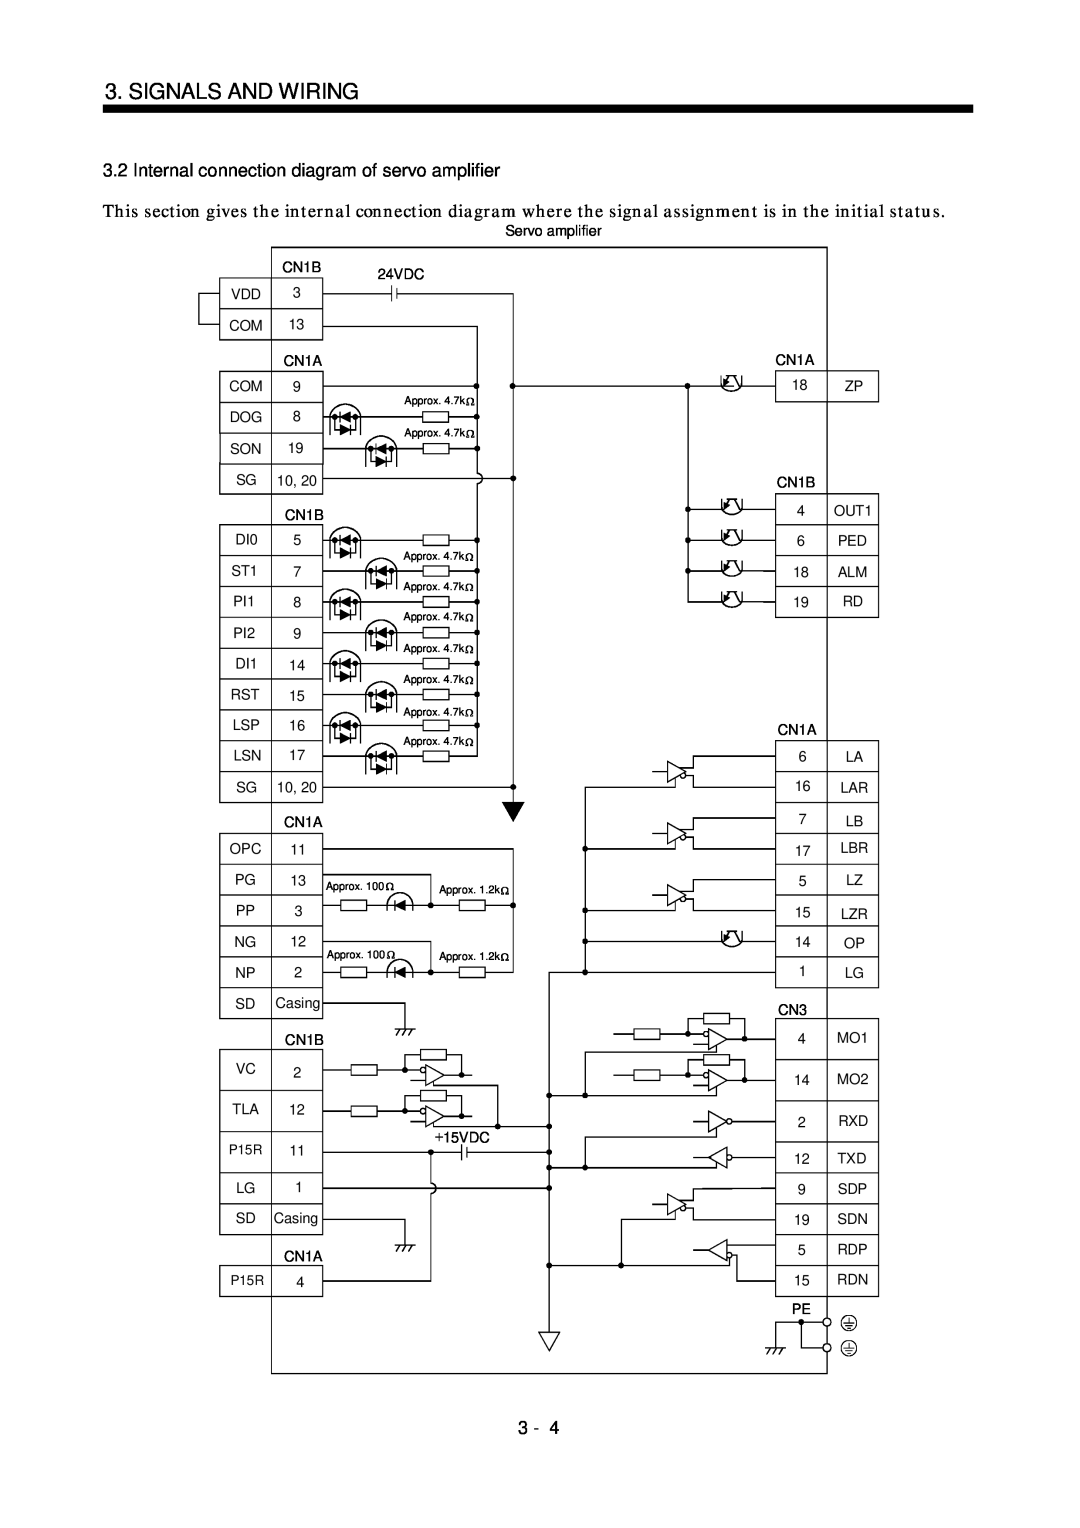 Mitsubishi Electronics MR-J2S- CL specifications Signals And Wiring 